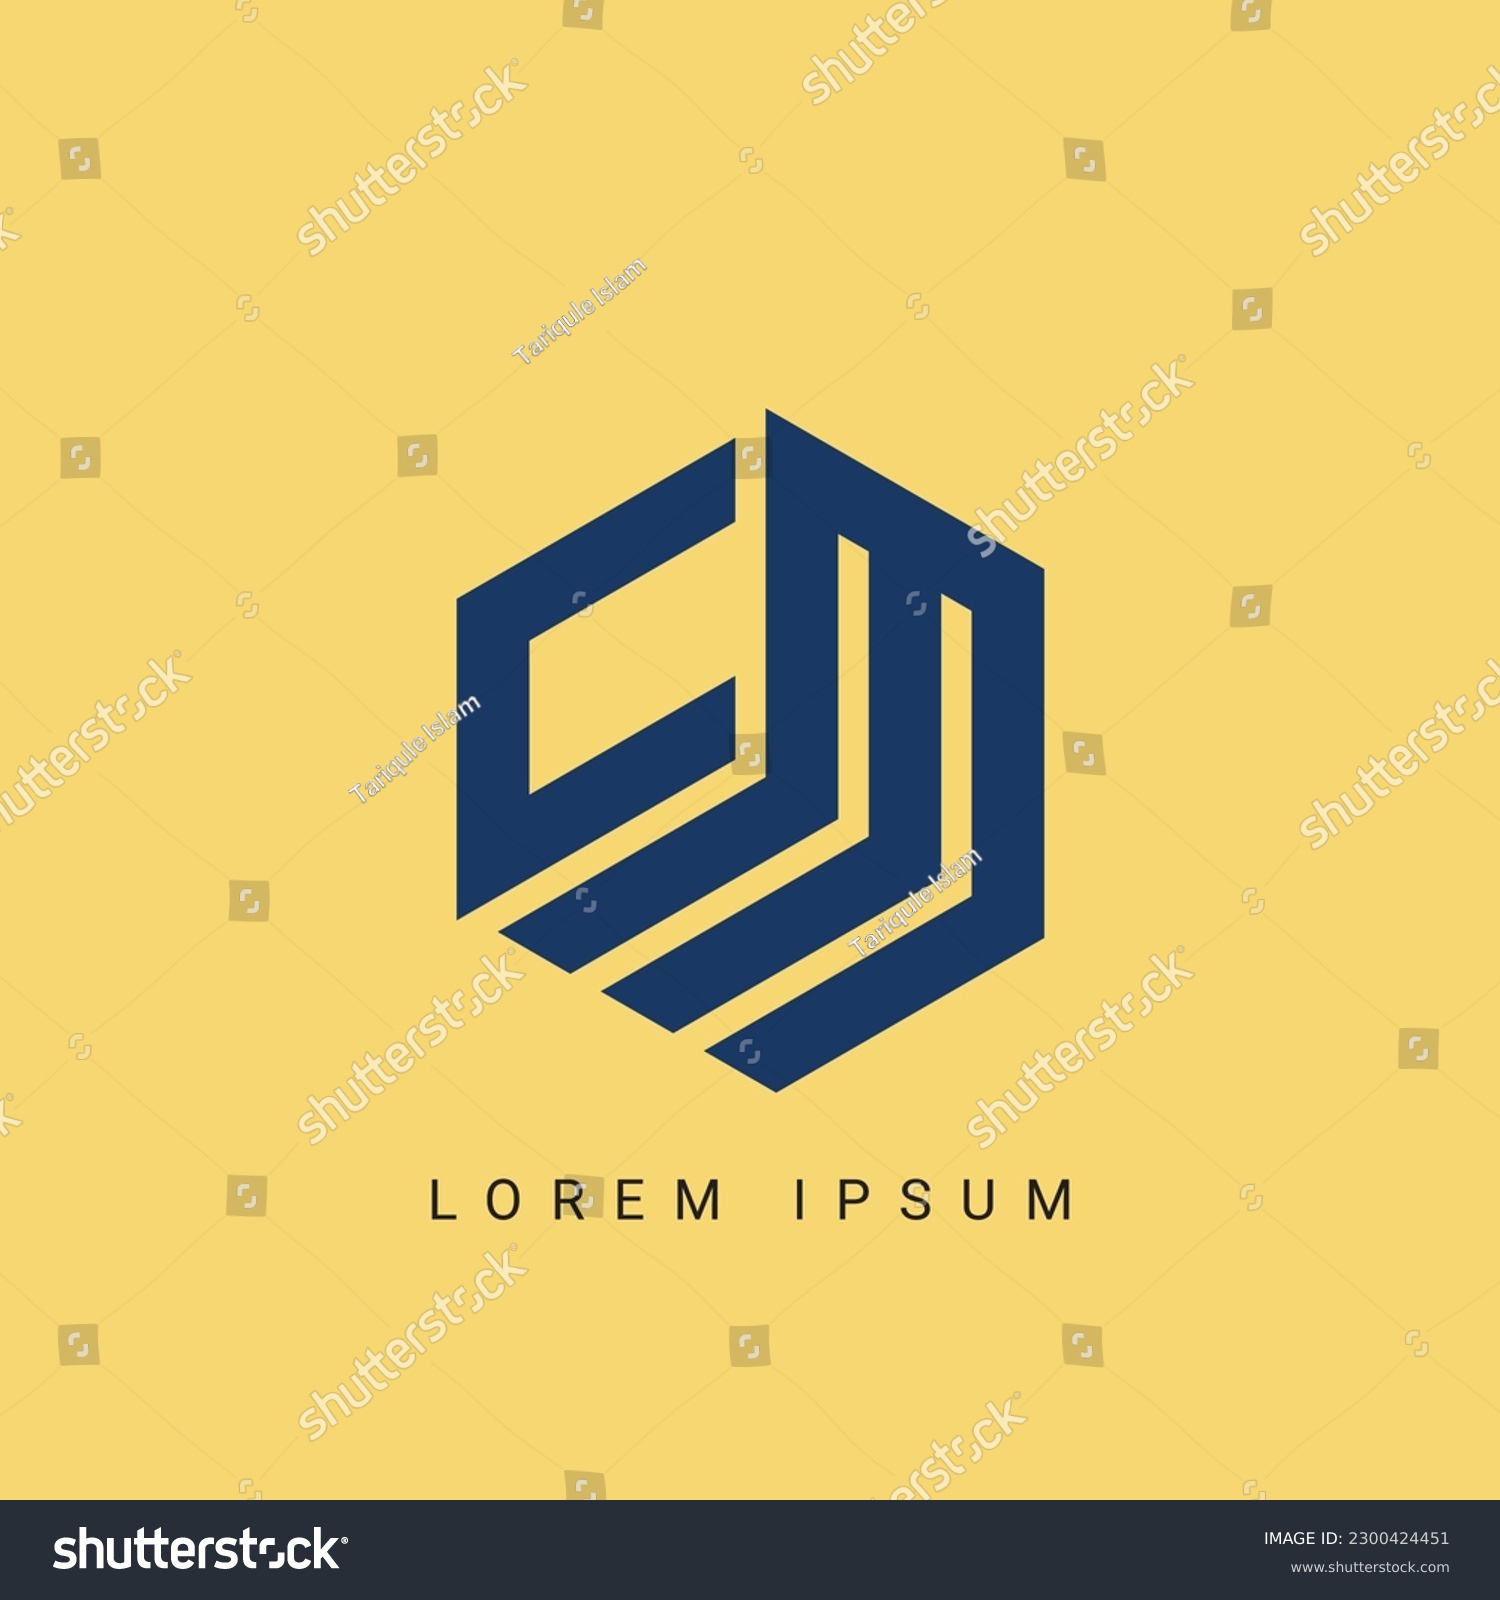 SVG of CM Letter Logo Design with a Creative Cut. Creative logo design svg